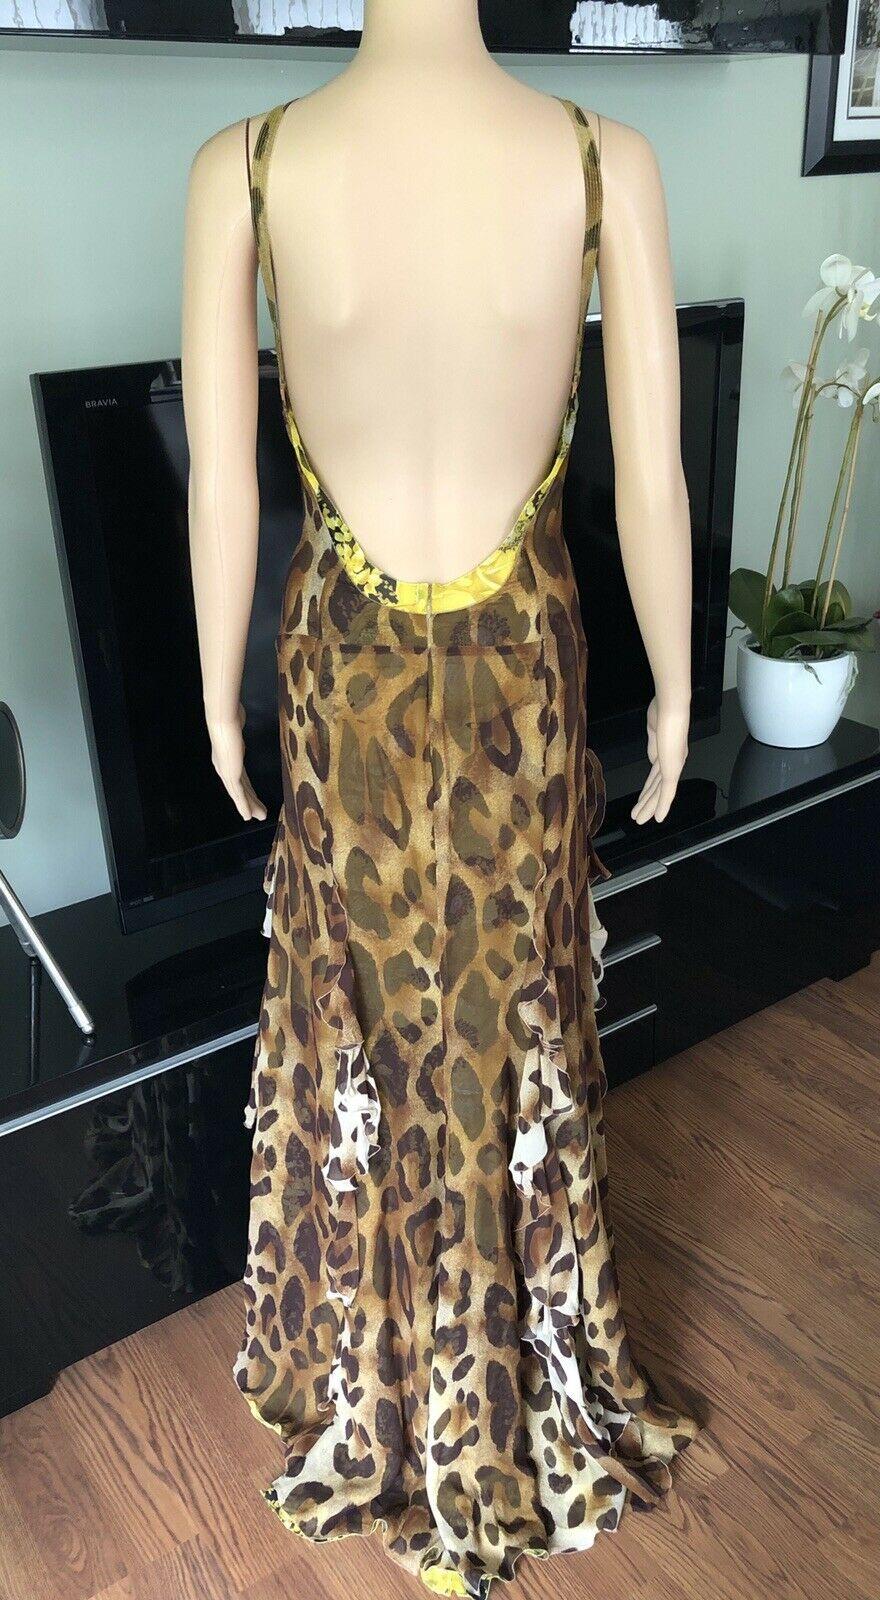 Gianni Versace S/S 2002 Vintage Plunged Backless Dress Gown In Good Condition For Sale In Naples, FL